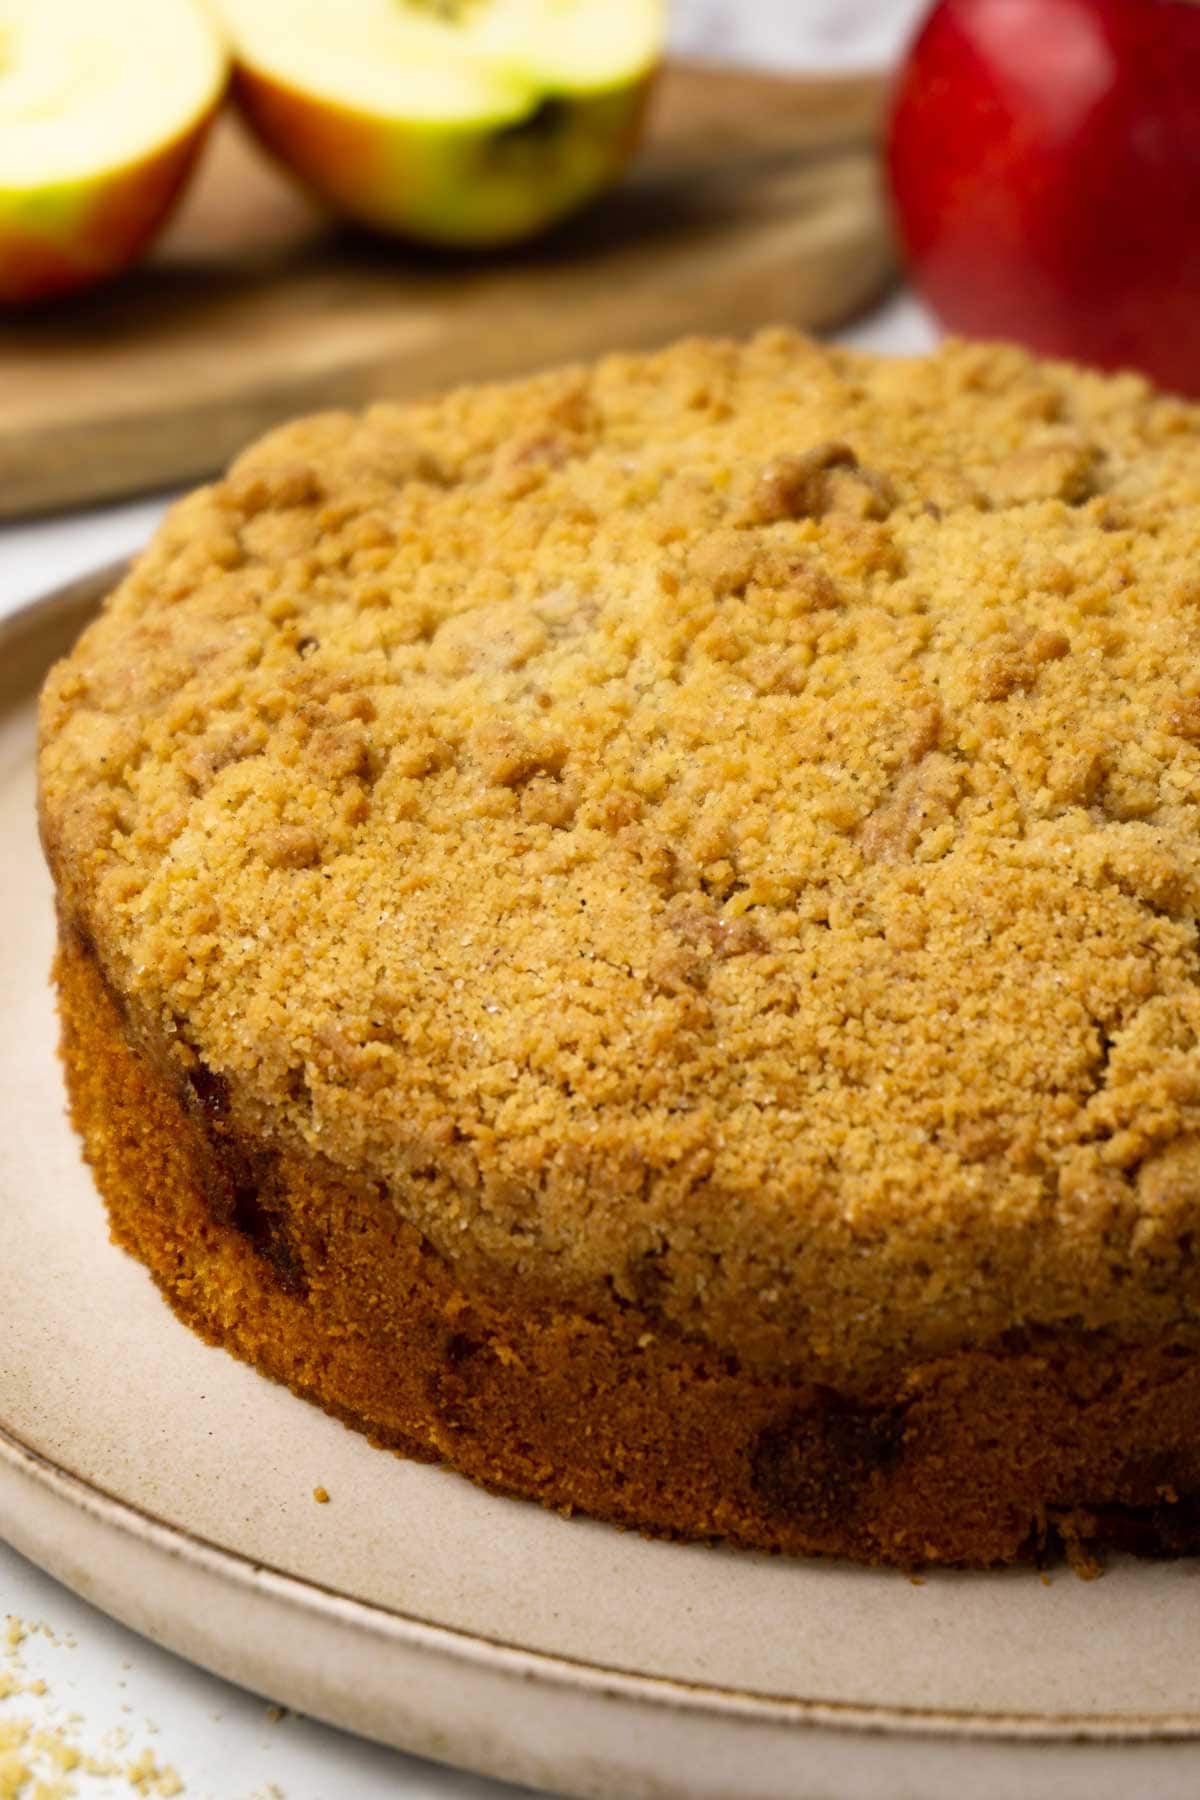 Freshly baked apple crumb cake with crunch streusel topping served on a large beige plate, fresh apples on the background.